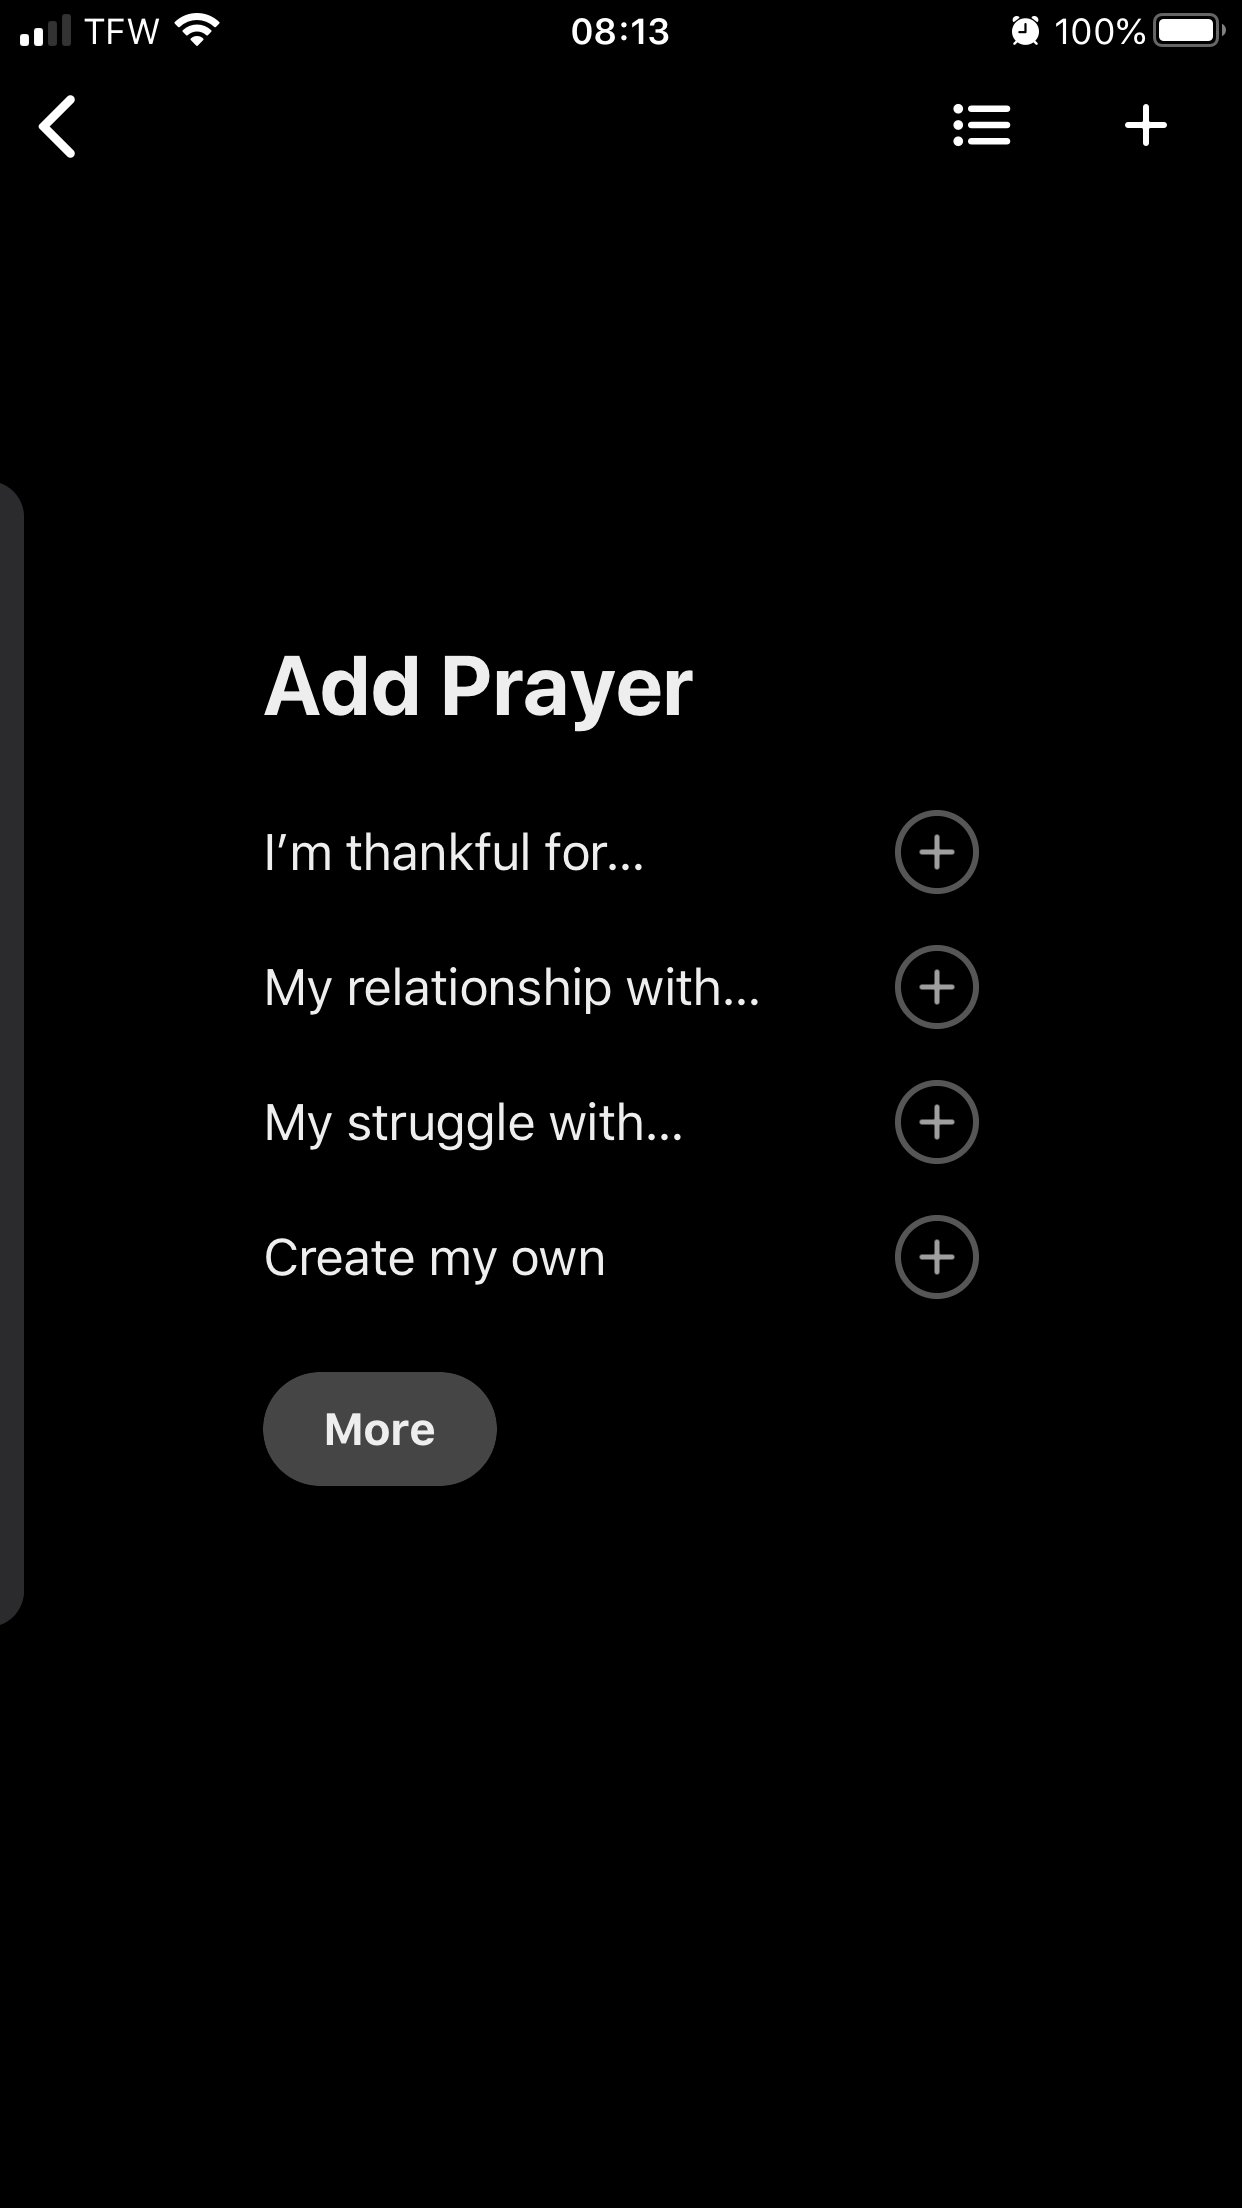 Add Prayer ... YouVersion Community creates 1 million prayers during first week of new Bible App Prayer feature